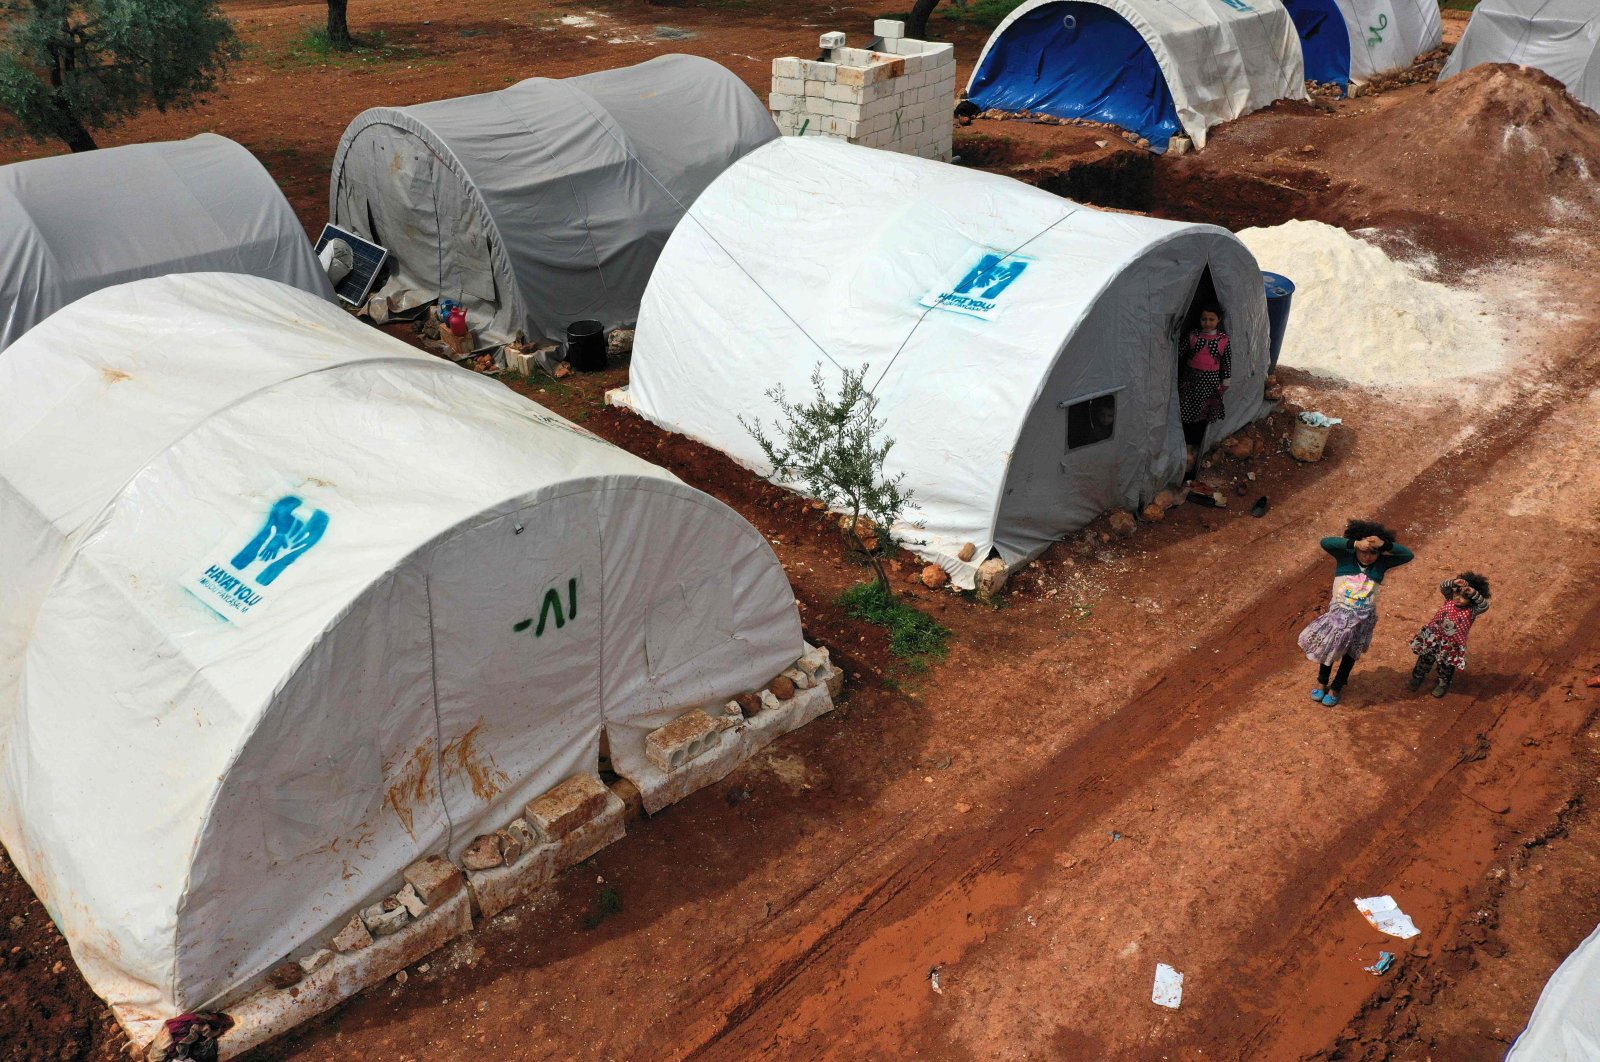 This picture taken on April 5, 2020 shows an aerial view of a camp for displaced Syrians from Idlib and Aleppo provinces, near the town of Maaret Misrin in Syria's northwestern Idlib province. (AFP Photo)